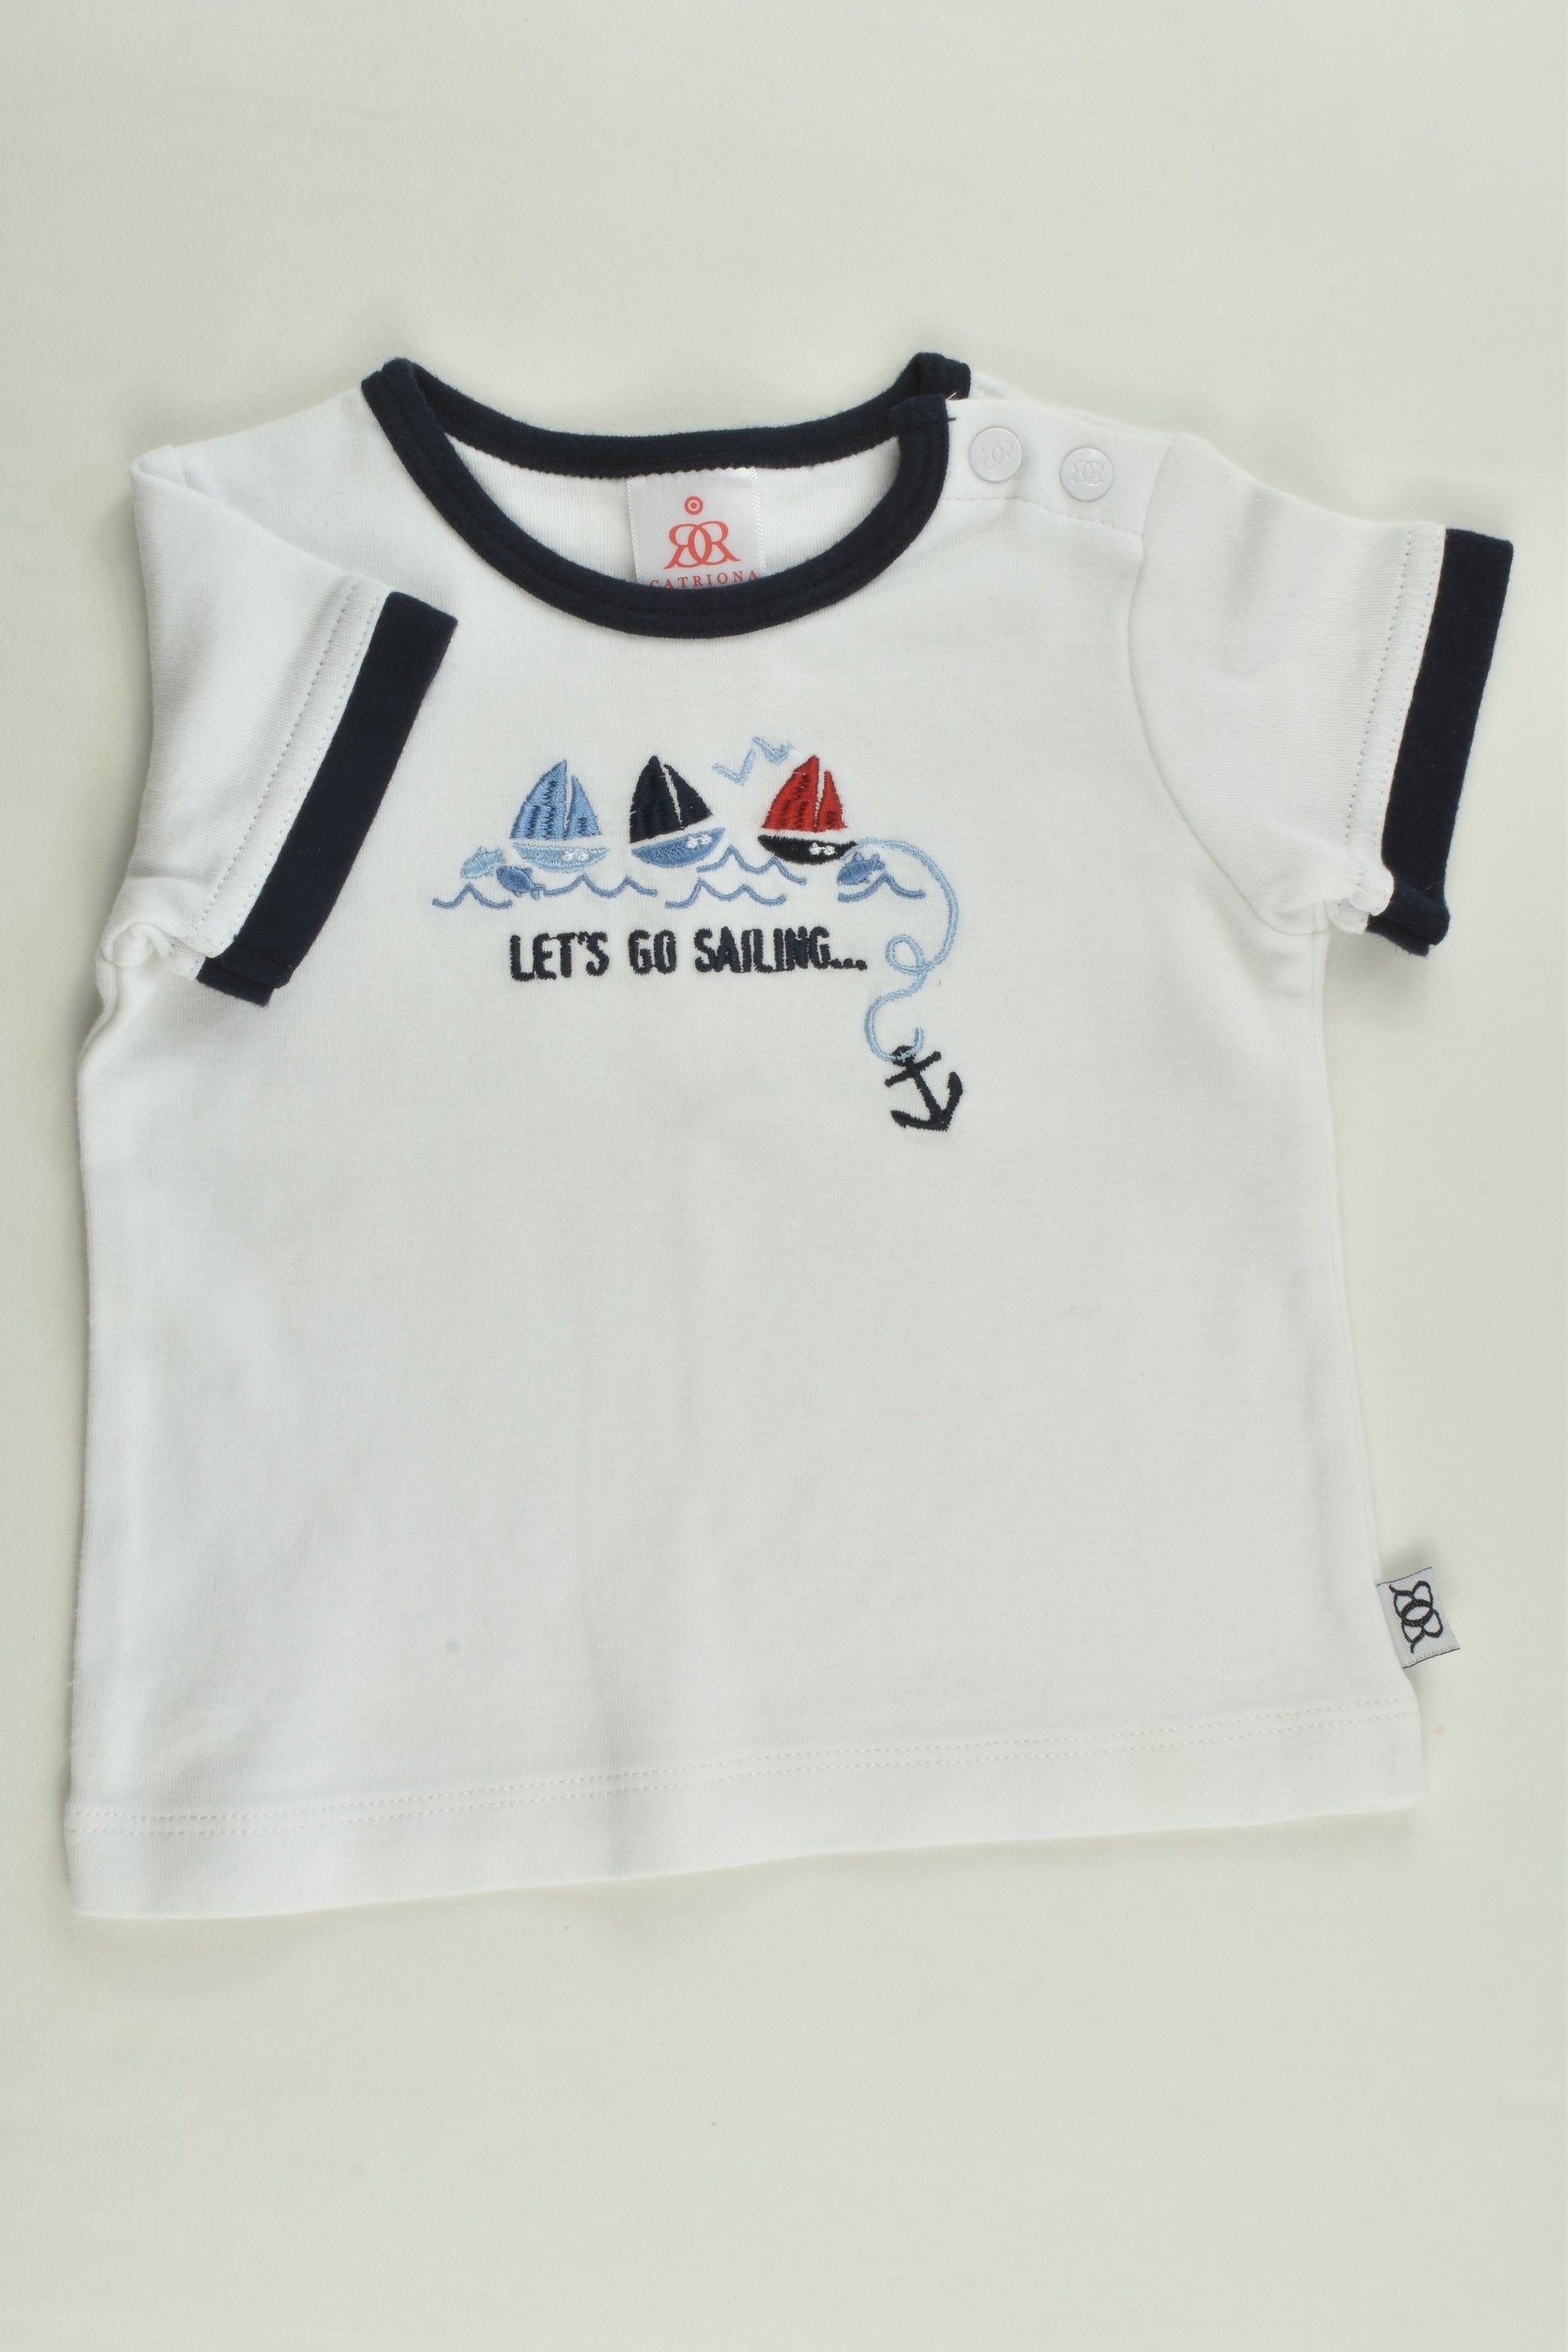 Catriona Rowntree Size 000 (0-3 months) 'Let's Go Sailing' T-shirt